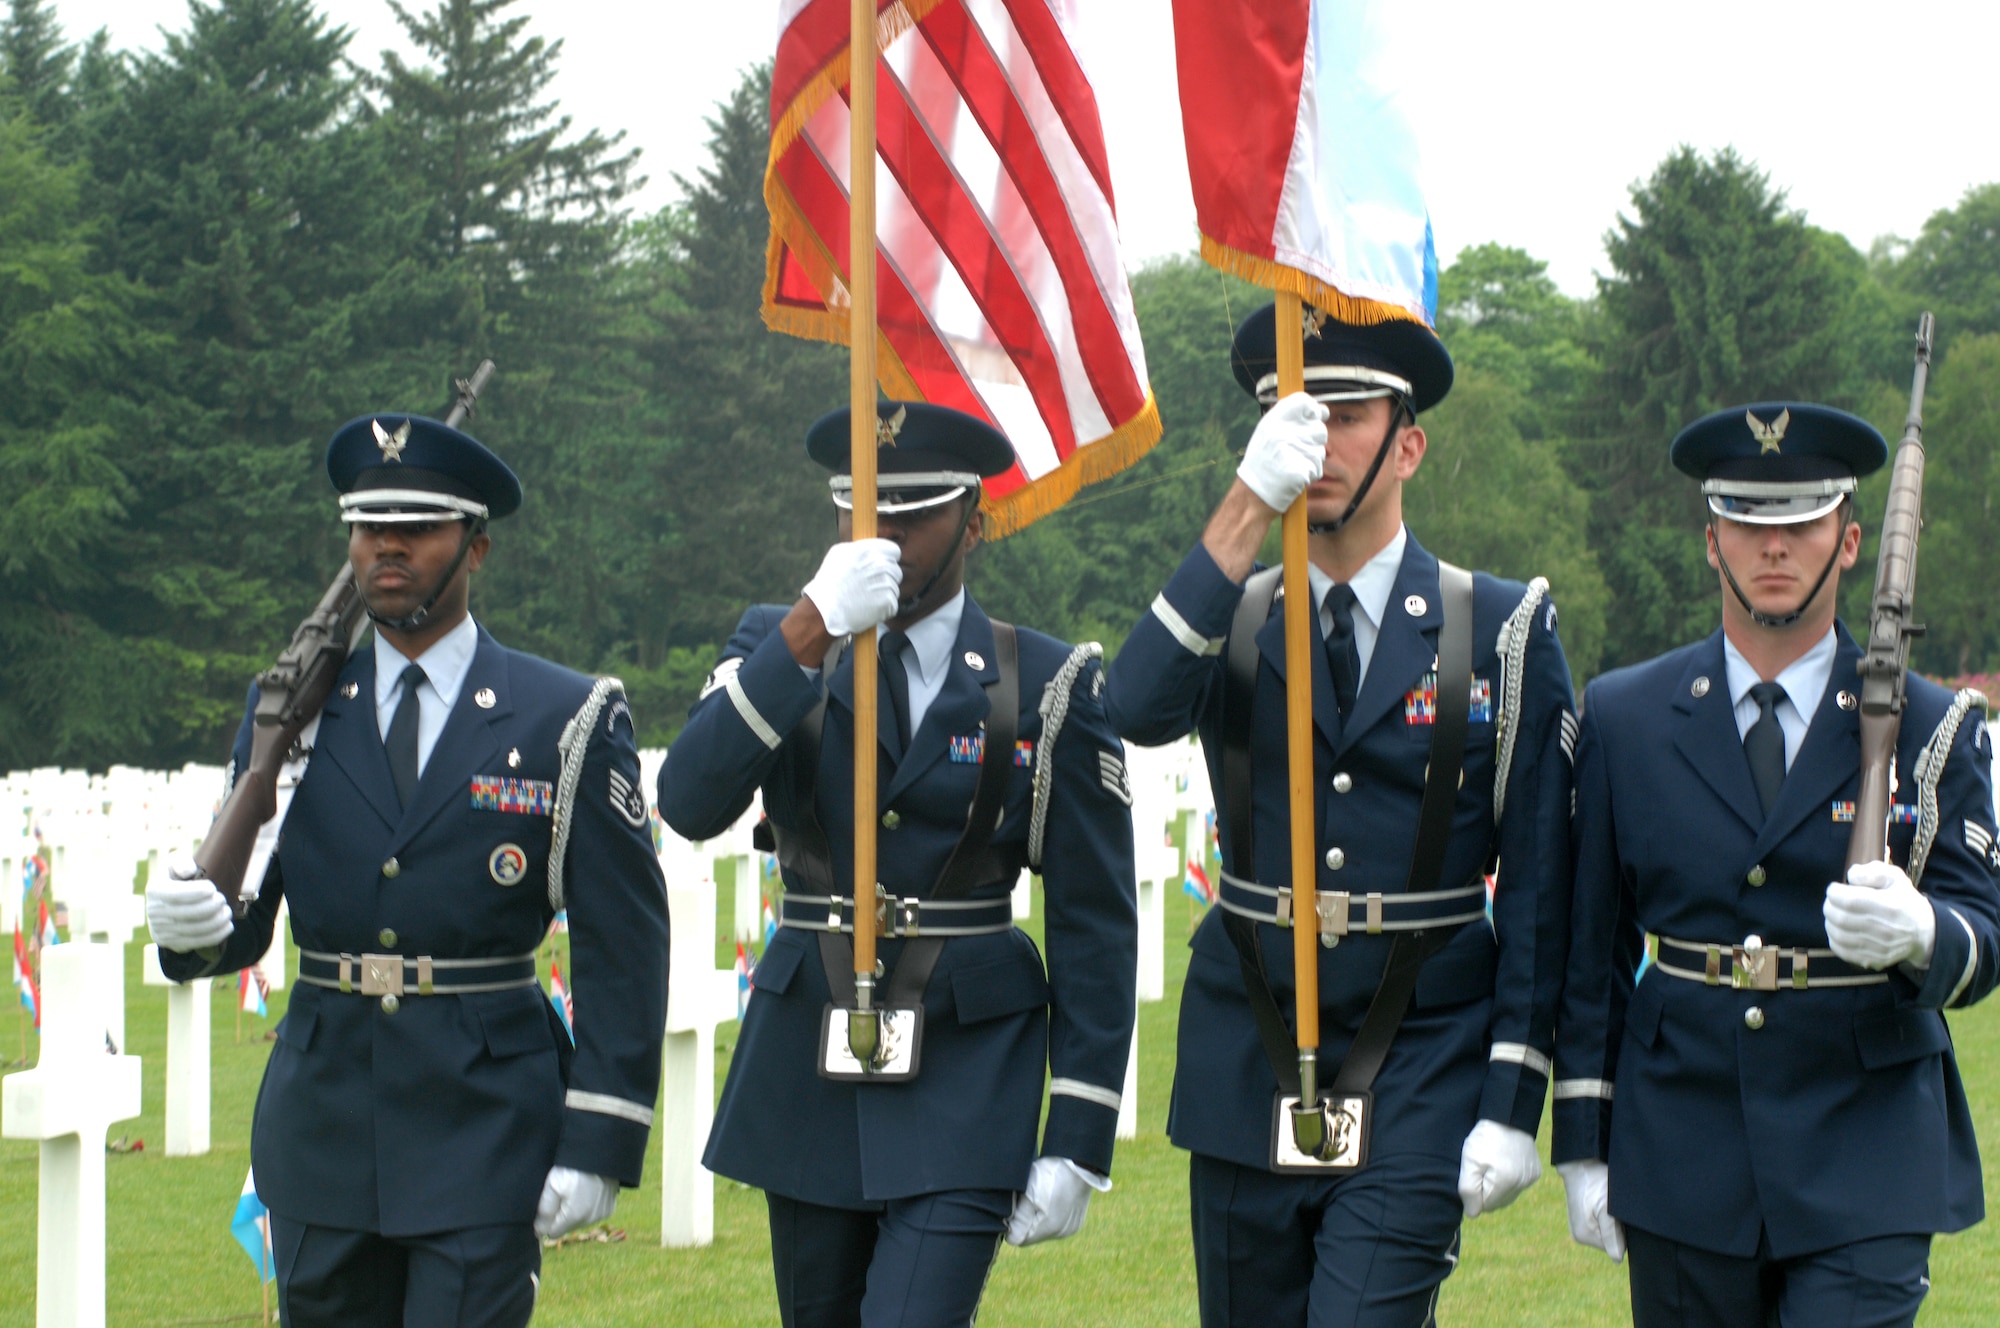 LUXEMBOURG CITY, Luxembourg – Airmen of the 52nd Fighter Wing Honor Guard present the colors during a Memorial Day ceremony at the Luxembourg American Cemetery and Memorial May 24, 2008. Many of the cemeteries in Belgium, the Netherlands and Luxembourg, where U.S. servicemembers are buried, have local nationals who have adopted the American graves. It is common for them to honor the fallen servicemembers on Memorial Day by decorating the graves as an expression of appreciation for their freedom and the sacrifices made by Americans on their behalf. (U.S. Air Force photo by Staff Sgt. Logan Tuttle)